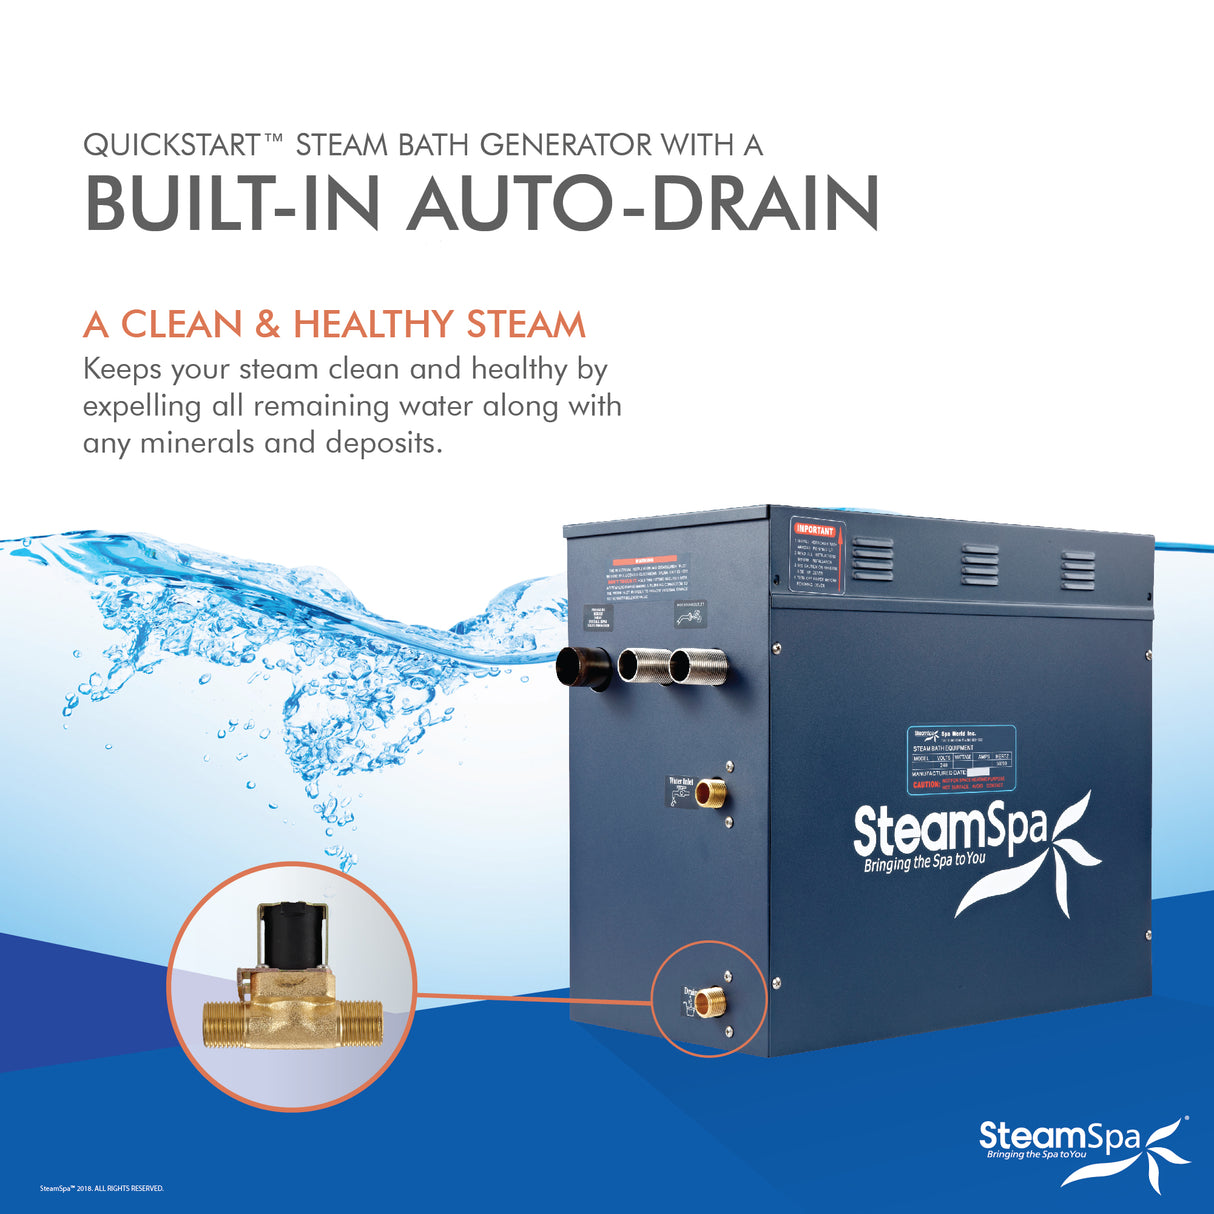 SteamSpa Executive 10.5 KW QuickStart Acu-Steam Bath Generator Package with Built-in Auto Drain and Install Kit in Oil Rubbed Bronze | Steam Generator Kit with Dual Control Panel Steamhead 240V | EXT1050OB-A EXT1050OB-A